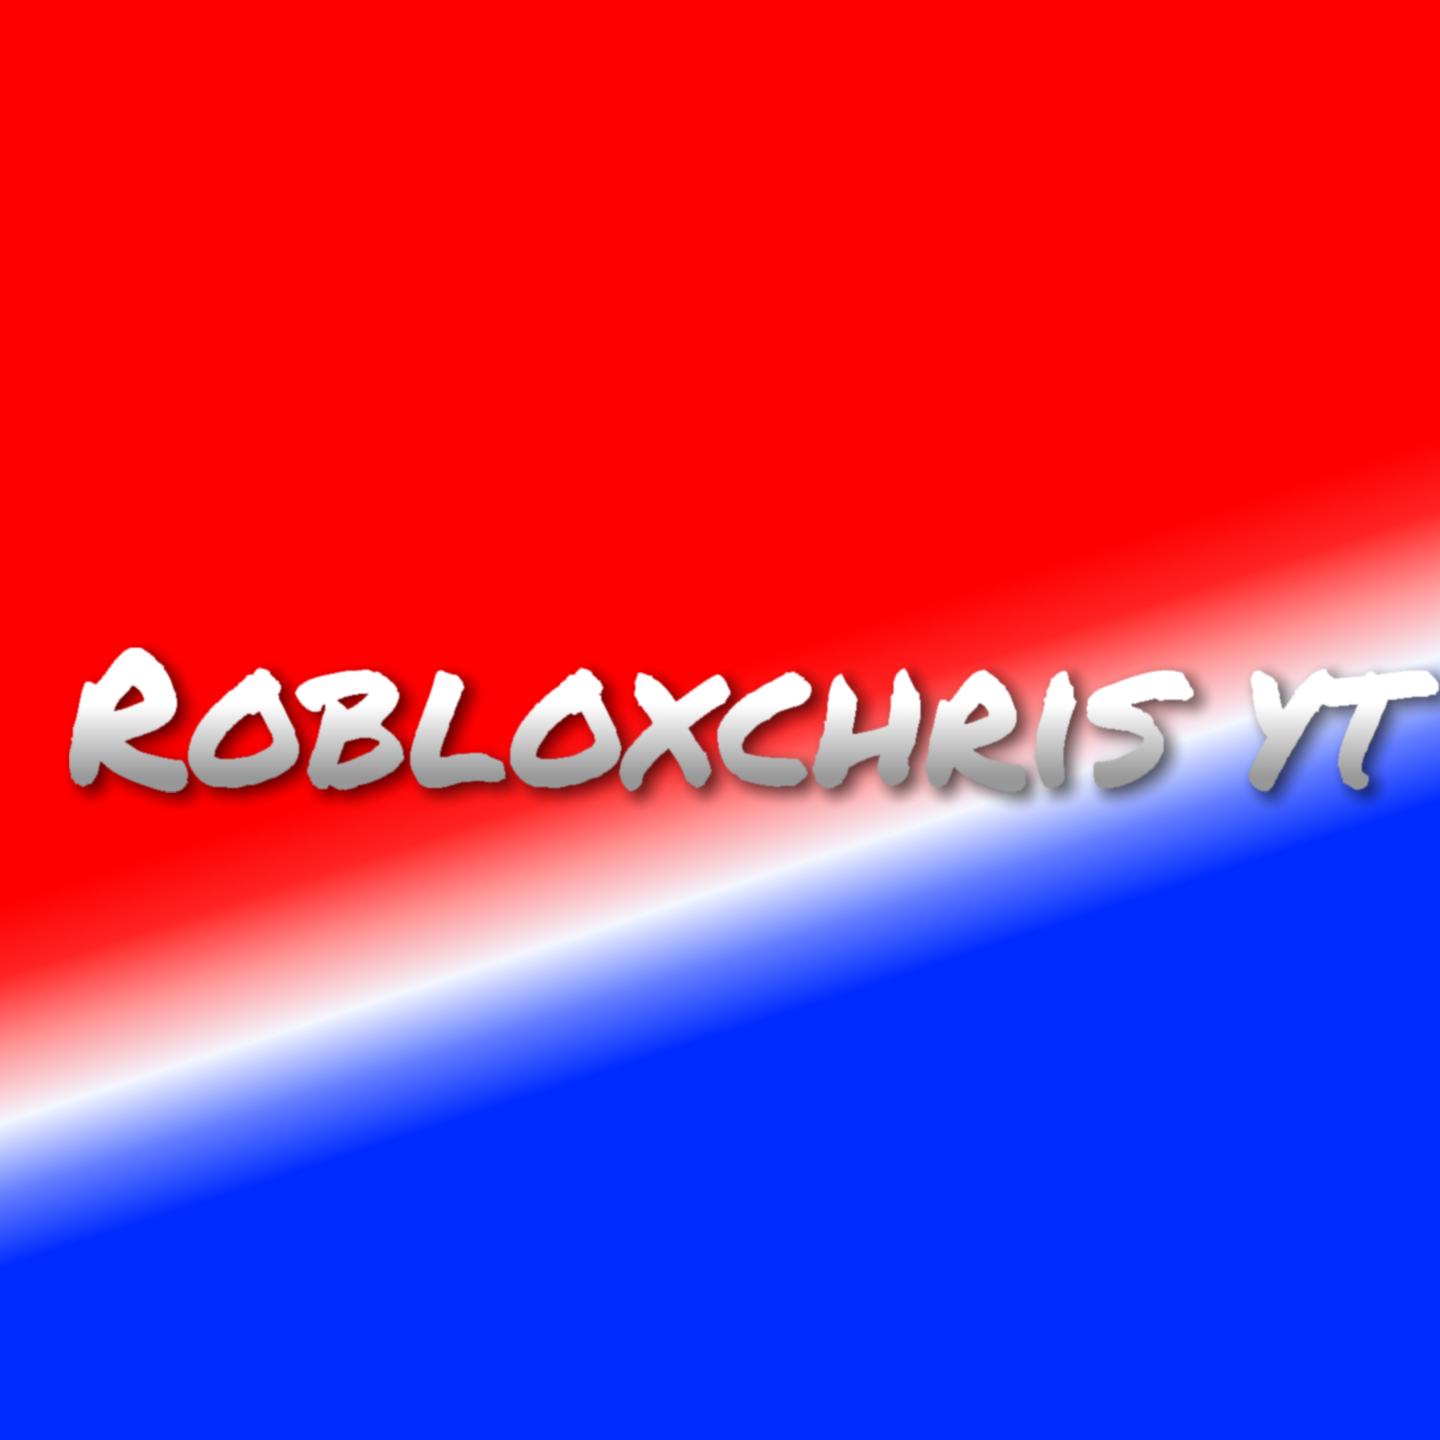 Robloxchris yt